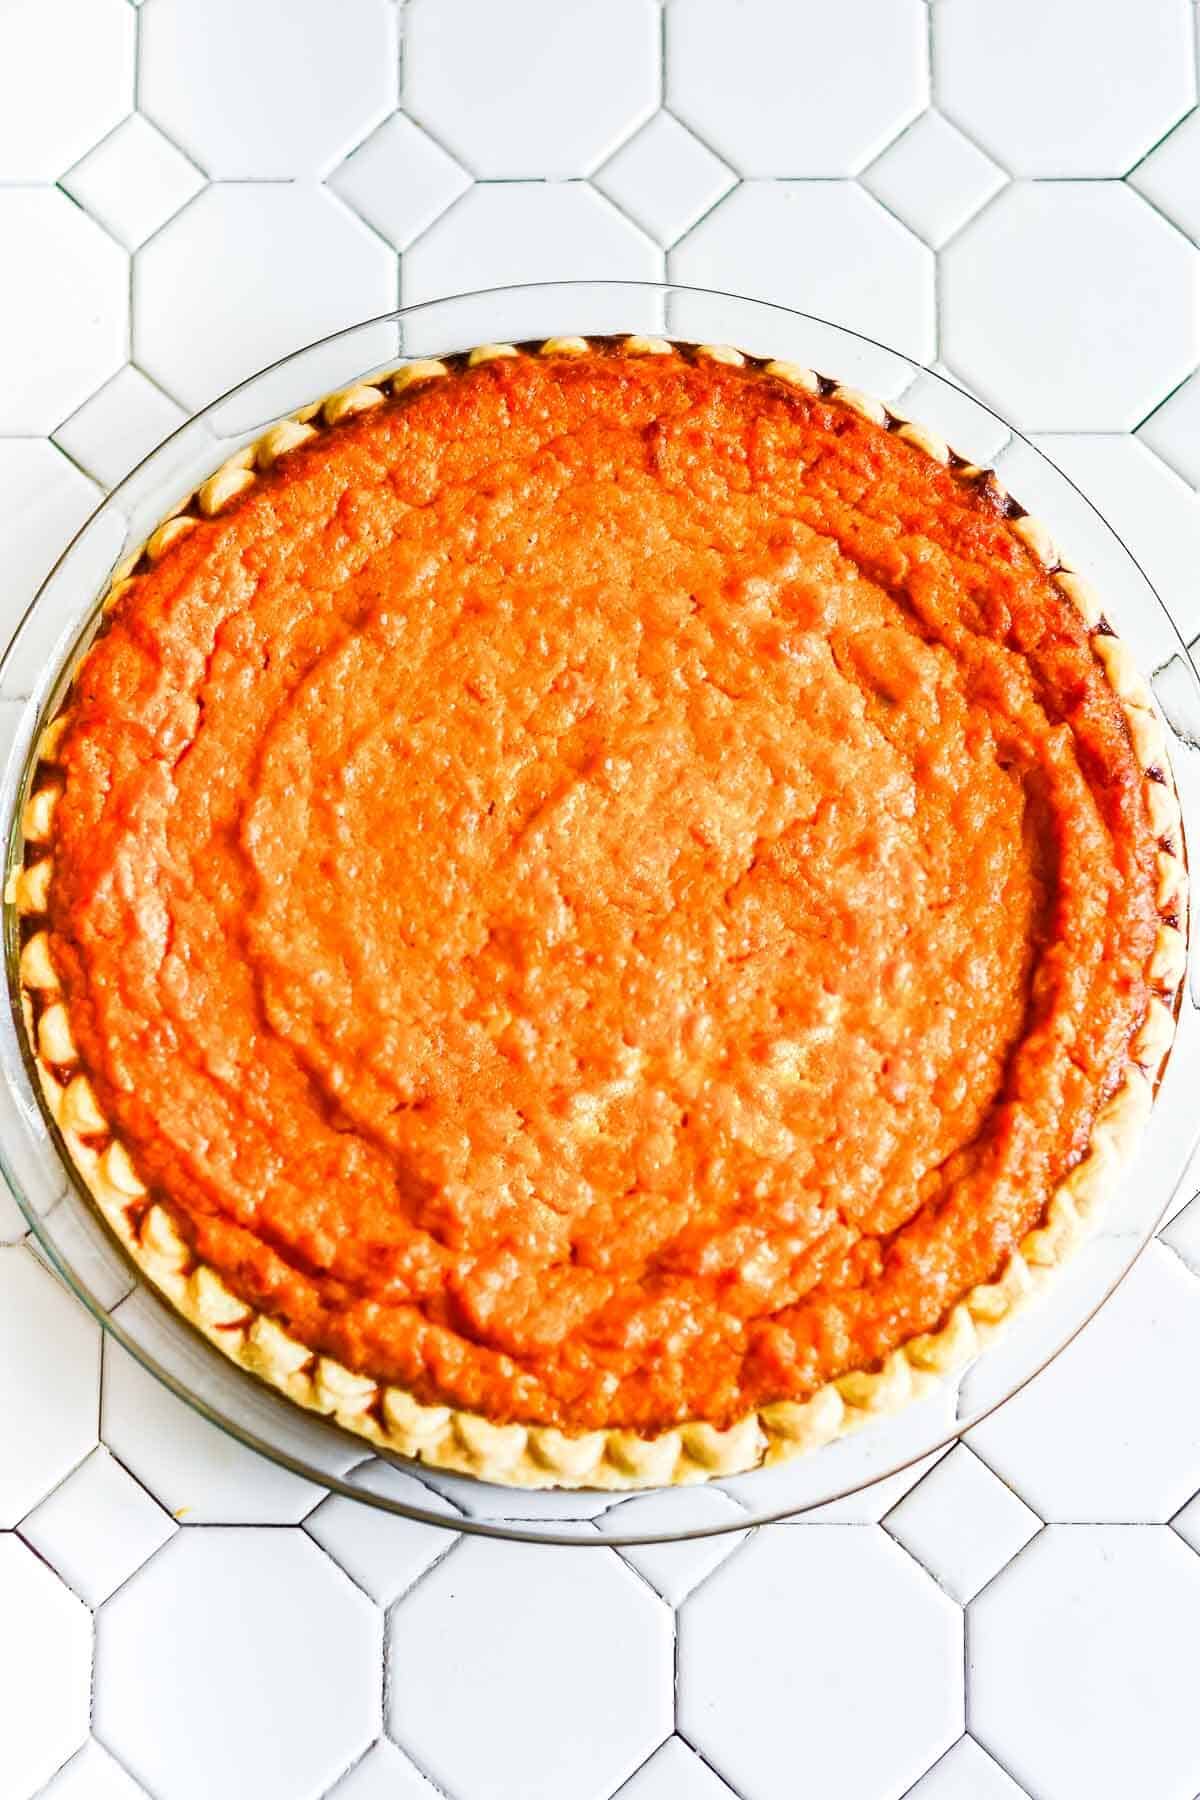 Grandma's Old Fashioned Sweet Potato Pie right after it comes out of the oven.